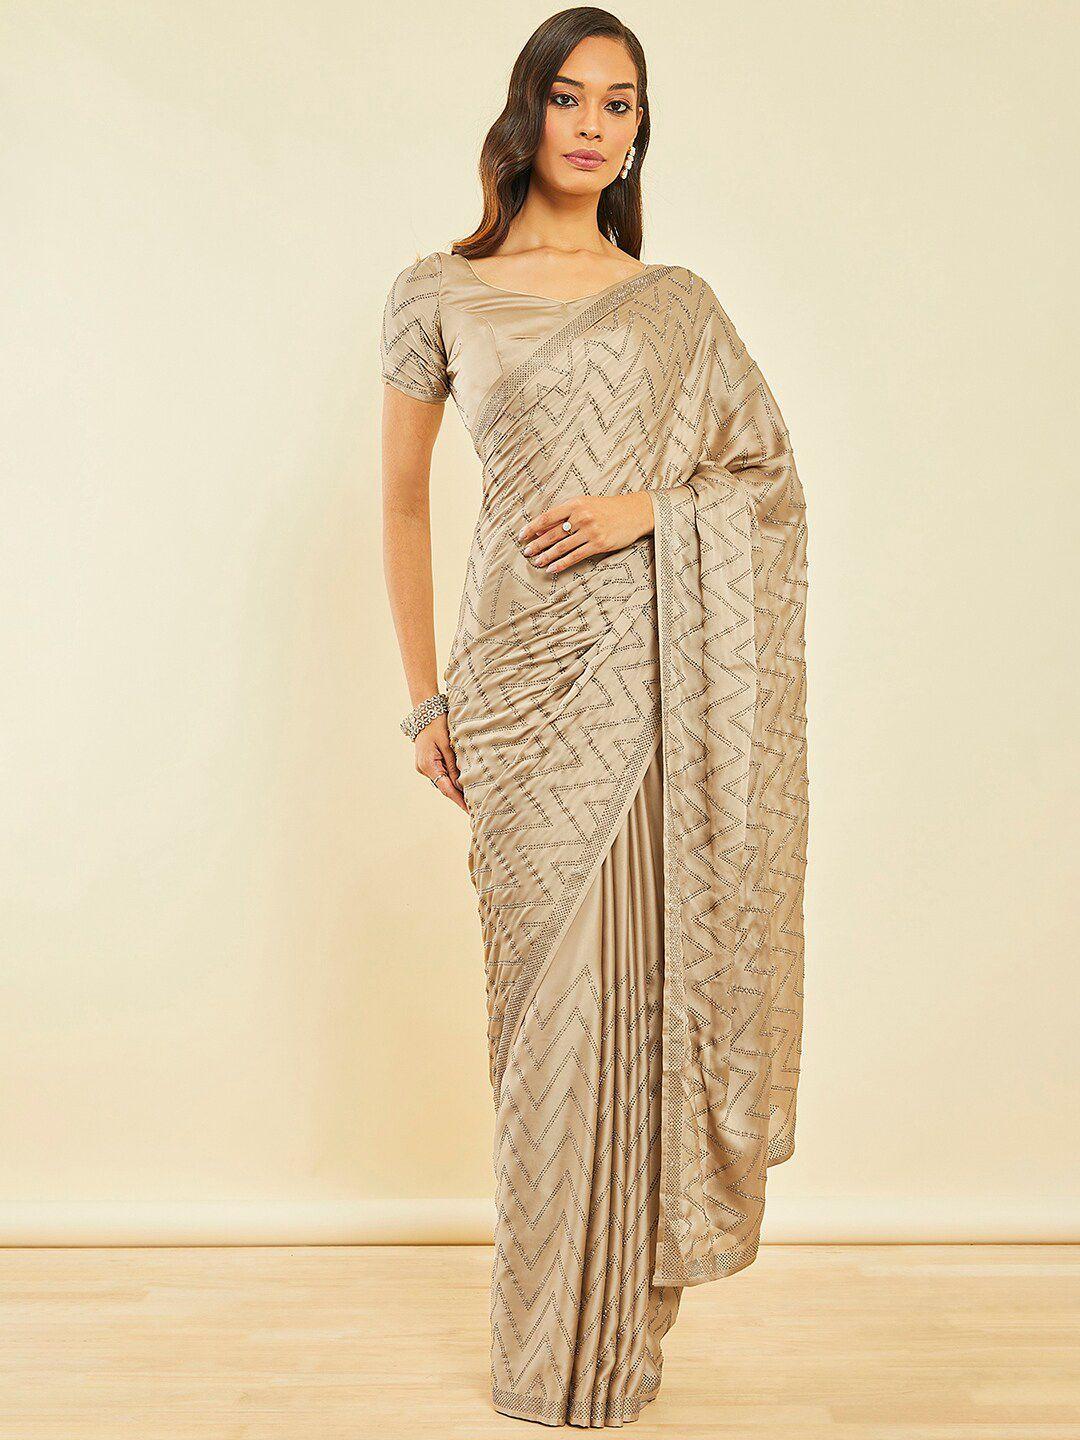 soch beige embellished beads and stones saree